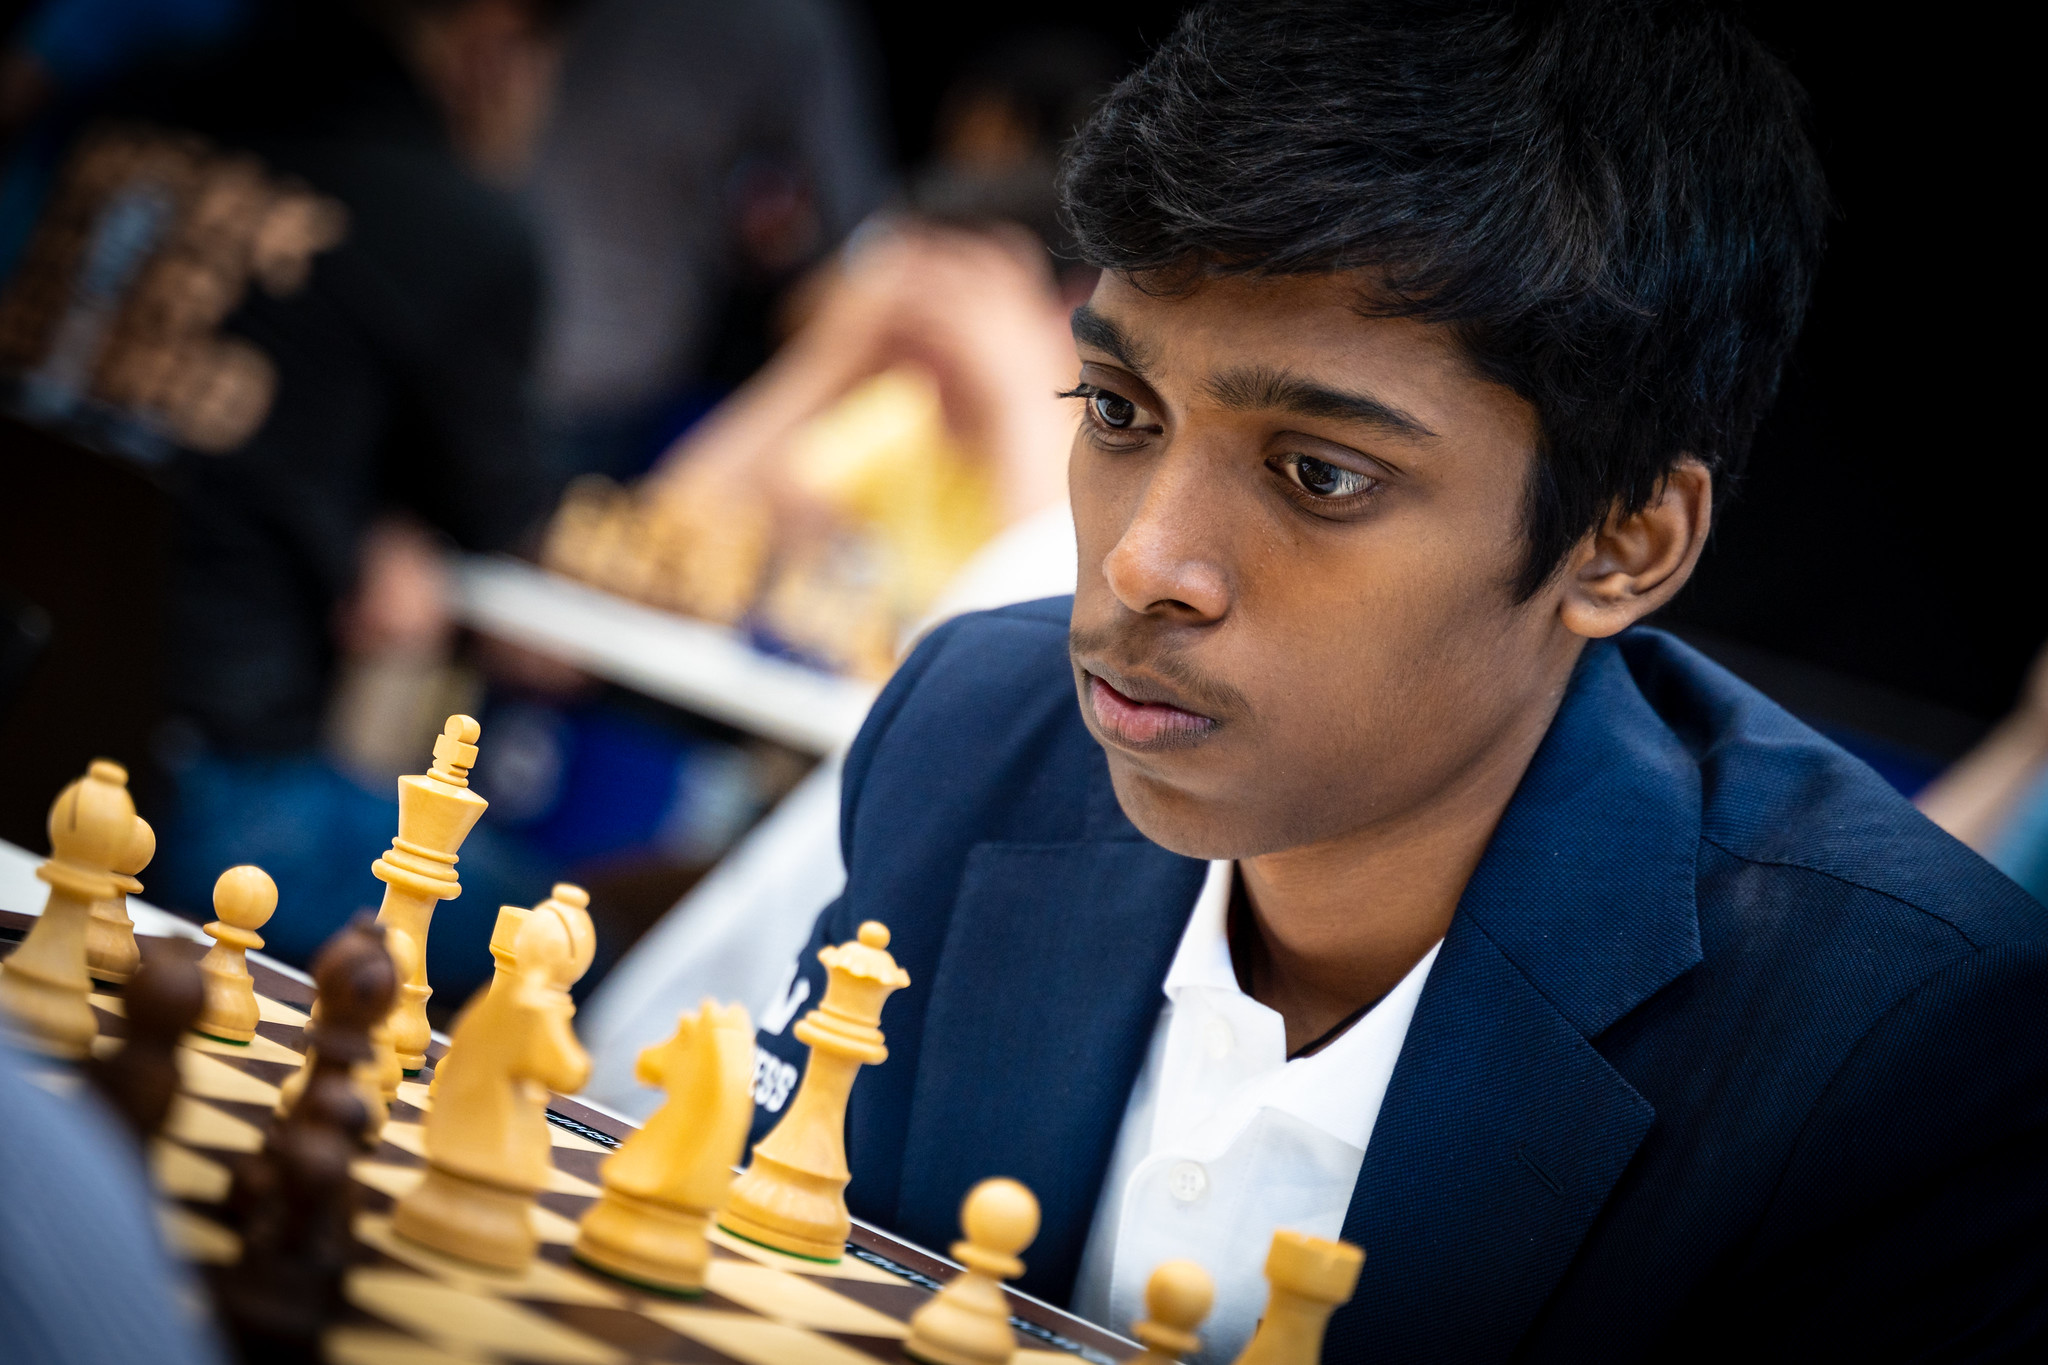 ChessBase India on X: Chingari Gulf Titans win the toss, and pick